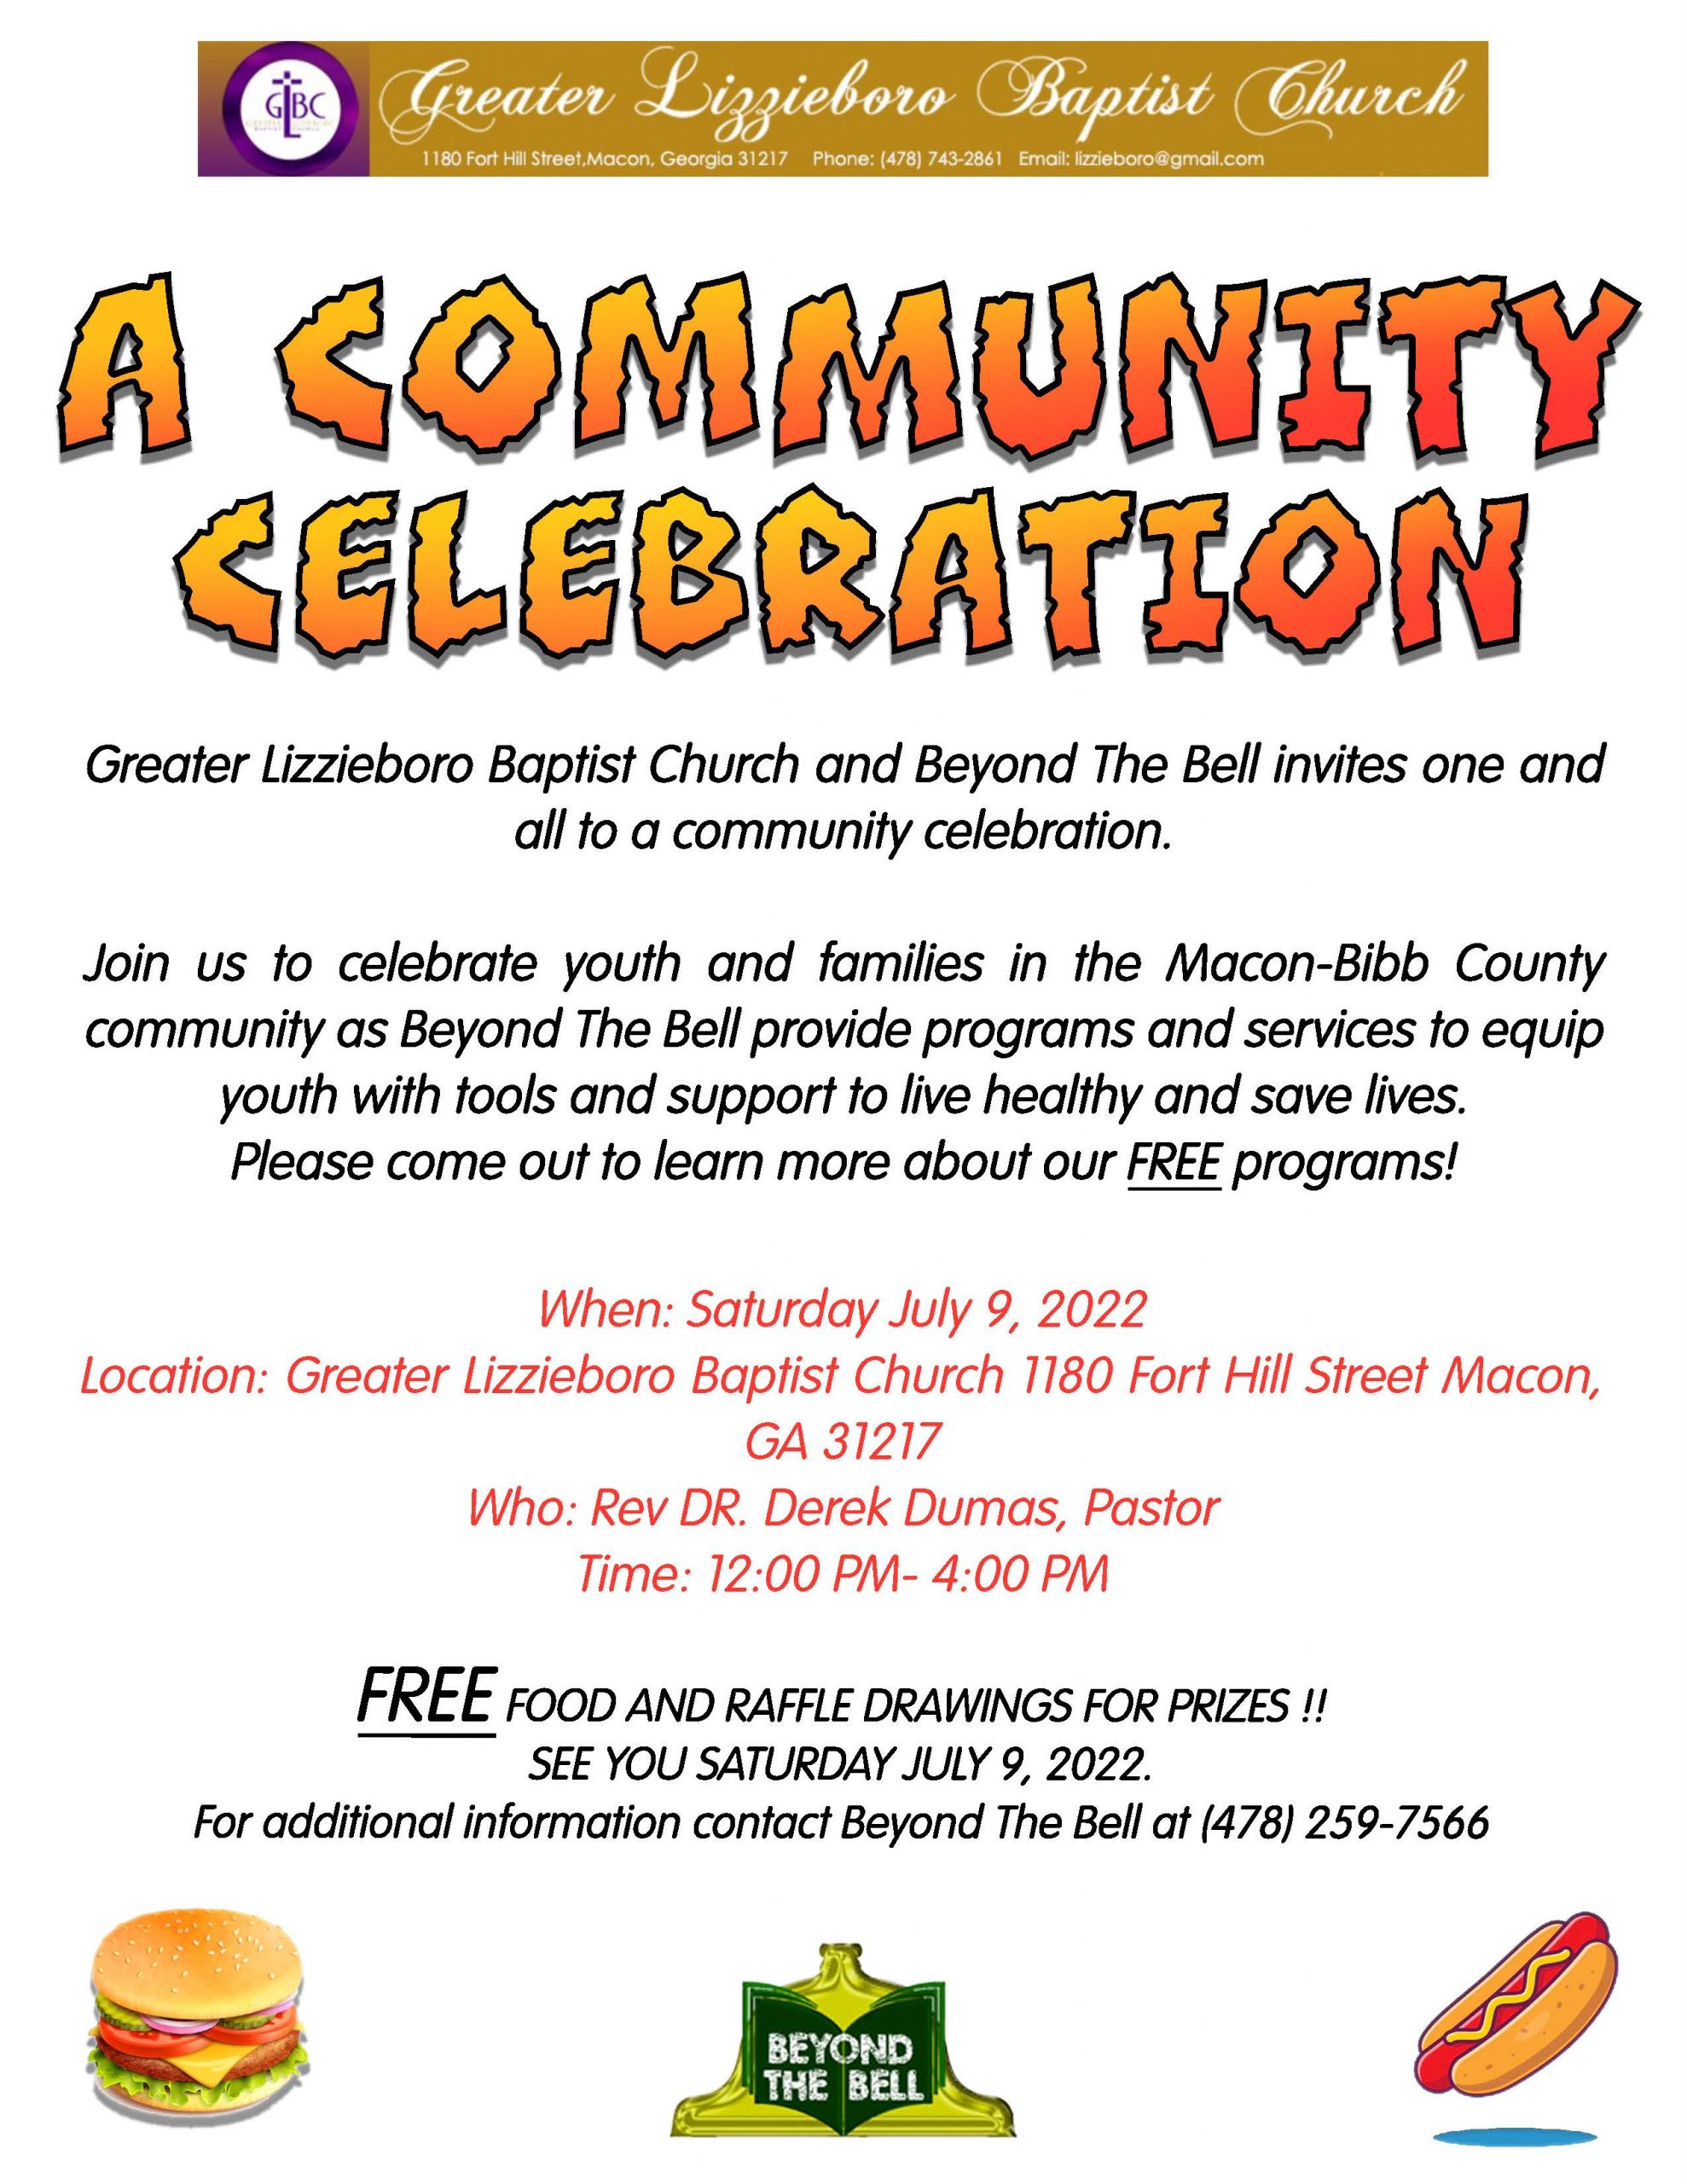 Poster for A Community Celebration to celebrate youth and families in the Macon-Bibb County community. Saturday, July 9, 2022 at Greater Lizzieboro Baptist Church. R from 12:00 PM - 4:00 PM Run by Reverend Doctor Derek Dumas, Pastor. Free Food and Raffle.